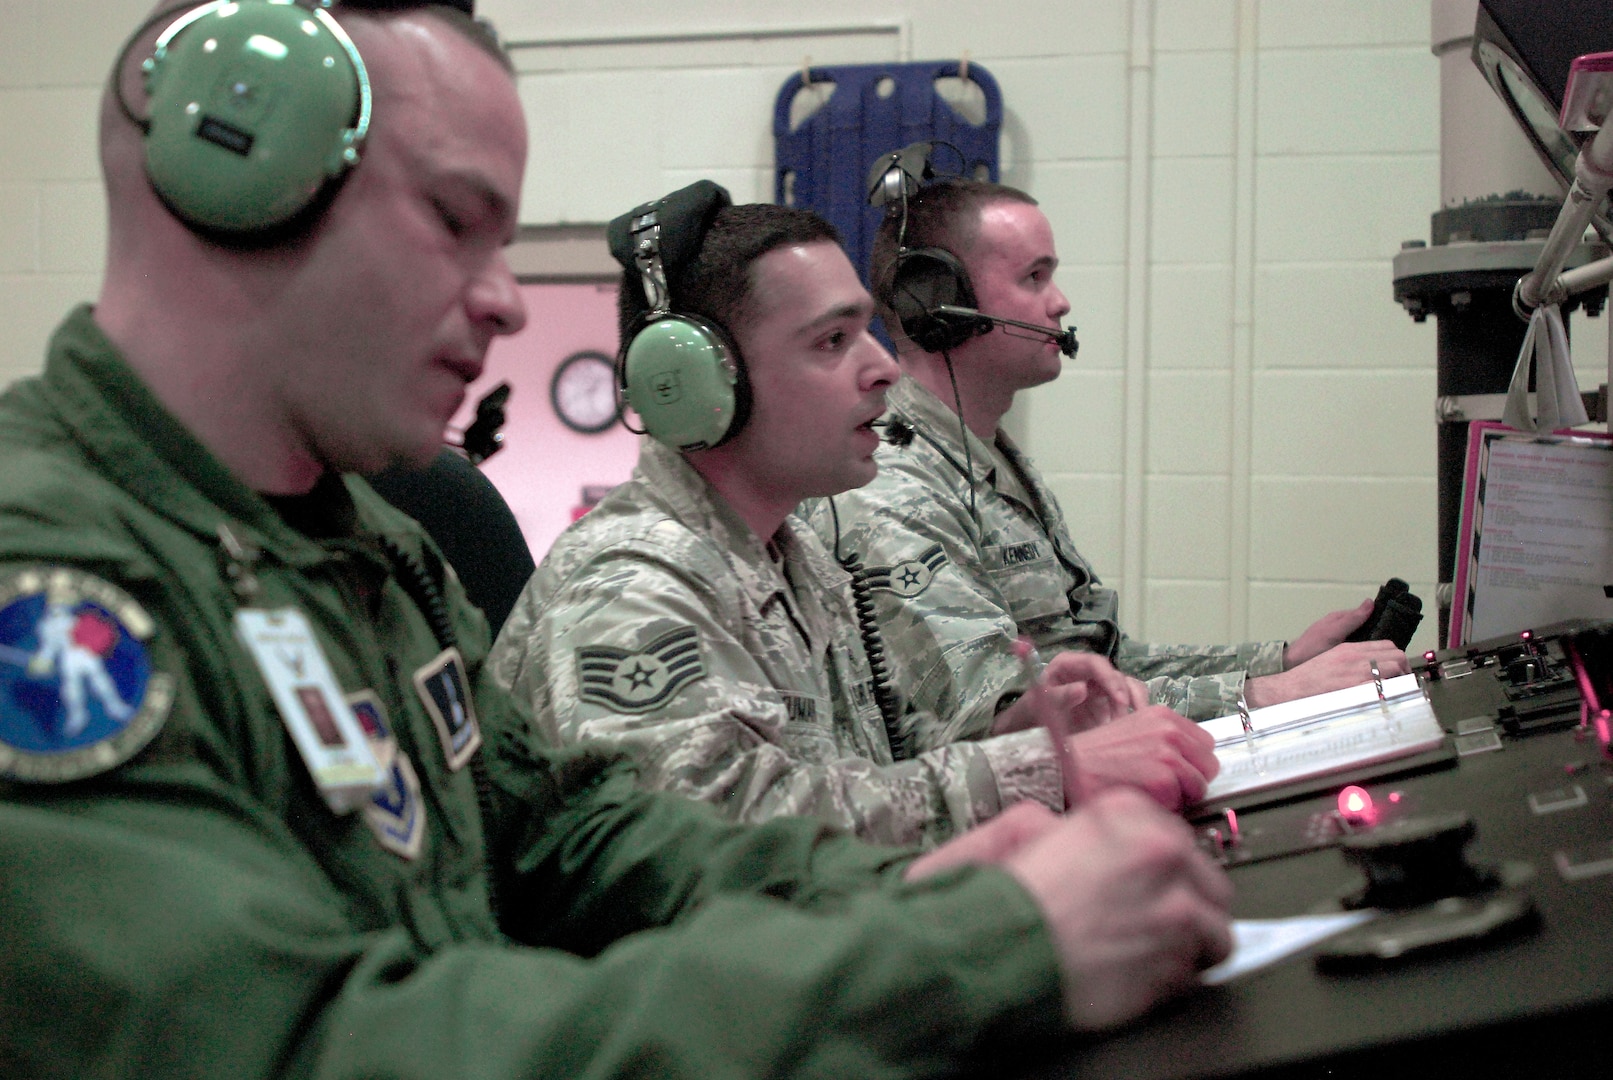 Aerospace physiologists from the 359th Aeromedical Squadron, Randolph Air Force Base, Texas, at the controls of a hyperbaric chamber during altitude training. Tech. Sgt. Michael Stegen takes notes while working as a recorder, similar to a court stenographer. Next to him, Staff Sgt. Vikas Kumar speaks with an inside observer while looking at her through the window (just out of the frame). In the background, Airman 1st Class Joseph Kennedy controls the barometric pressure in the chamber, simulating the effects of flight and altitude. (U. S. Air Force photo/Brian McGloin)
